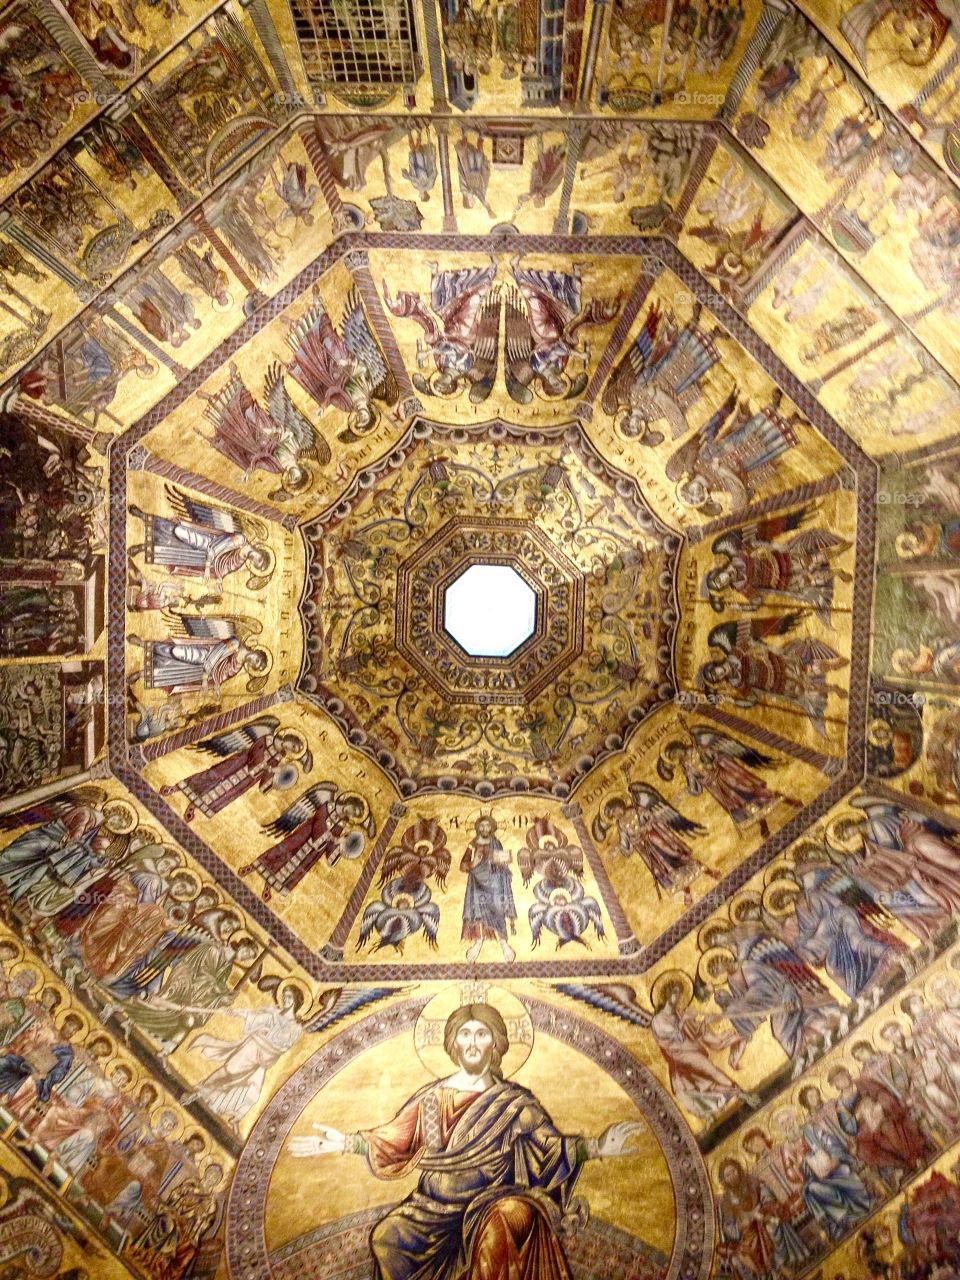 The interior dome of Florence Baptistery with gold mosaics of Christ, saints, angels, and biblical figures